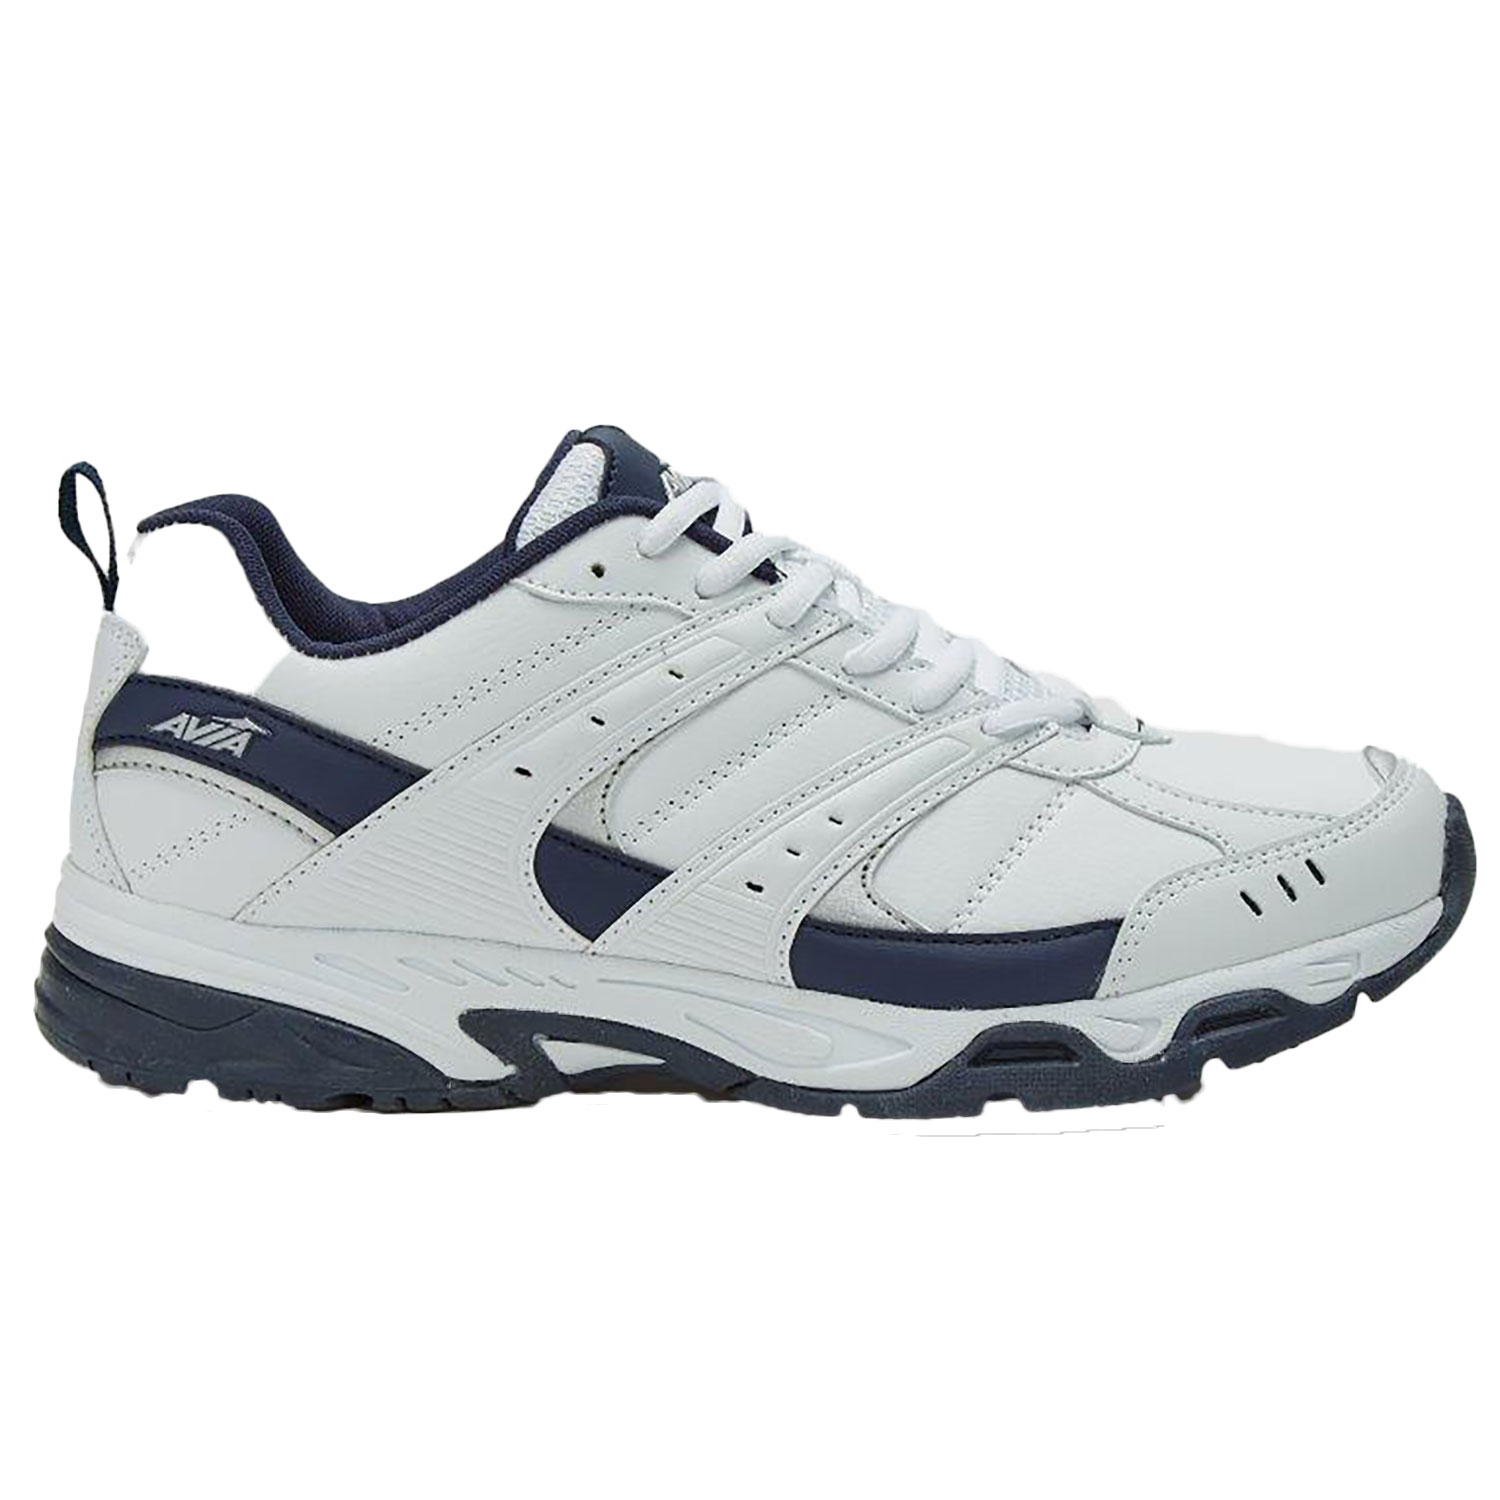 Exclusive Avia Avi-Verge Men's Wide Training Shoes at prices too low to ...